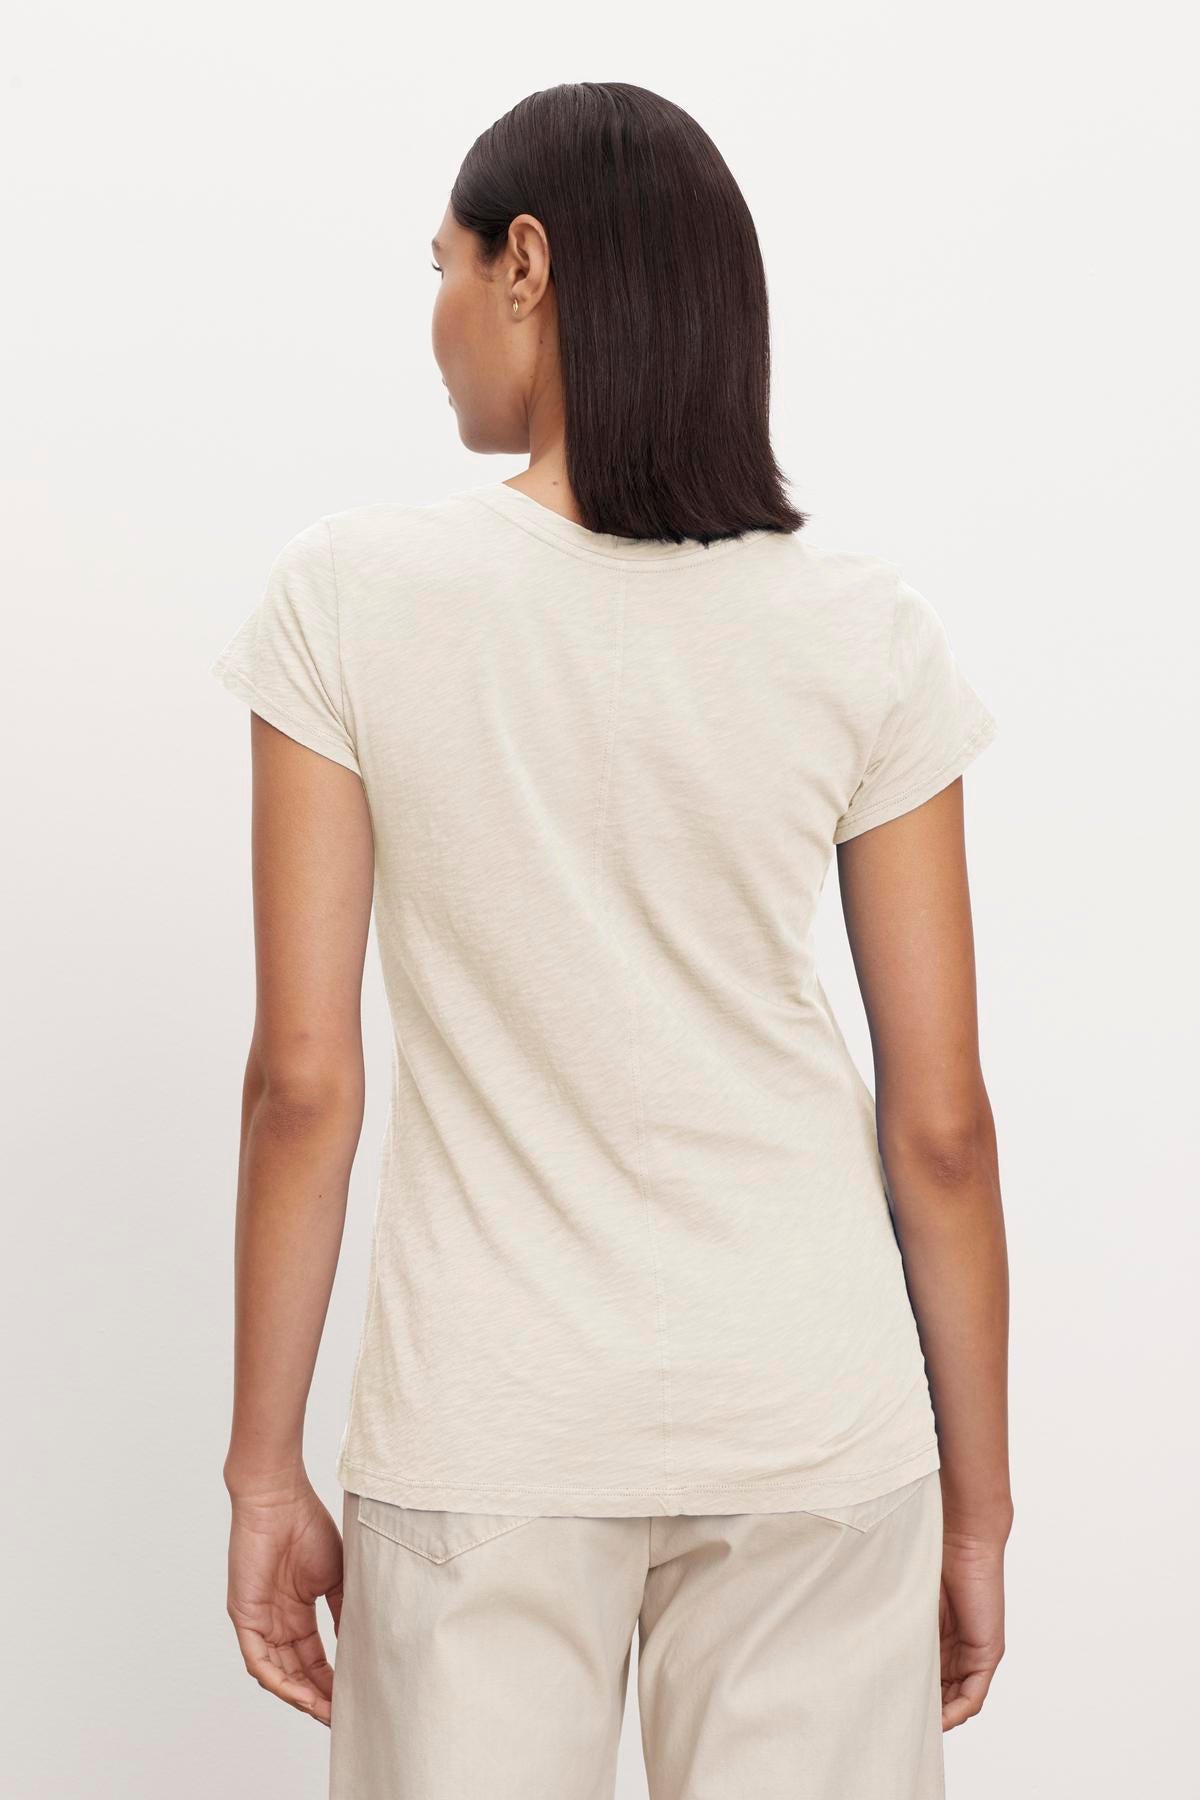 A person with straight, shoulder-length hair is facing away, wearing a light-colored Velvet by Graham & Spencer ODELIA TEE with a classic crew neckline and light-colored pants made from premium cotton against a plain background.-37249868497089